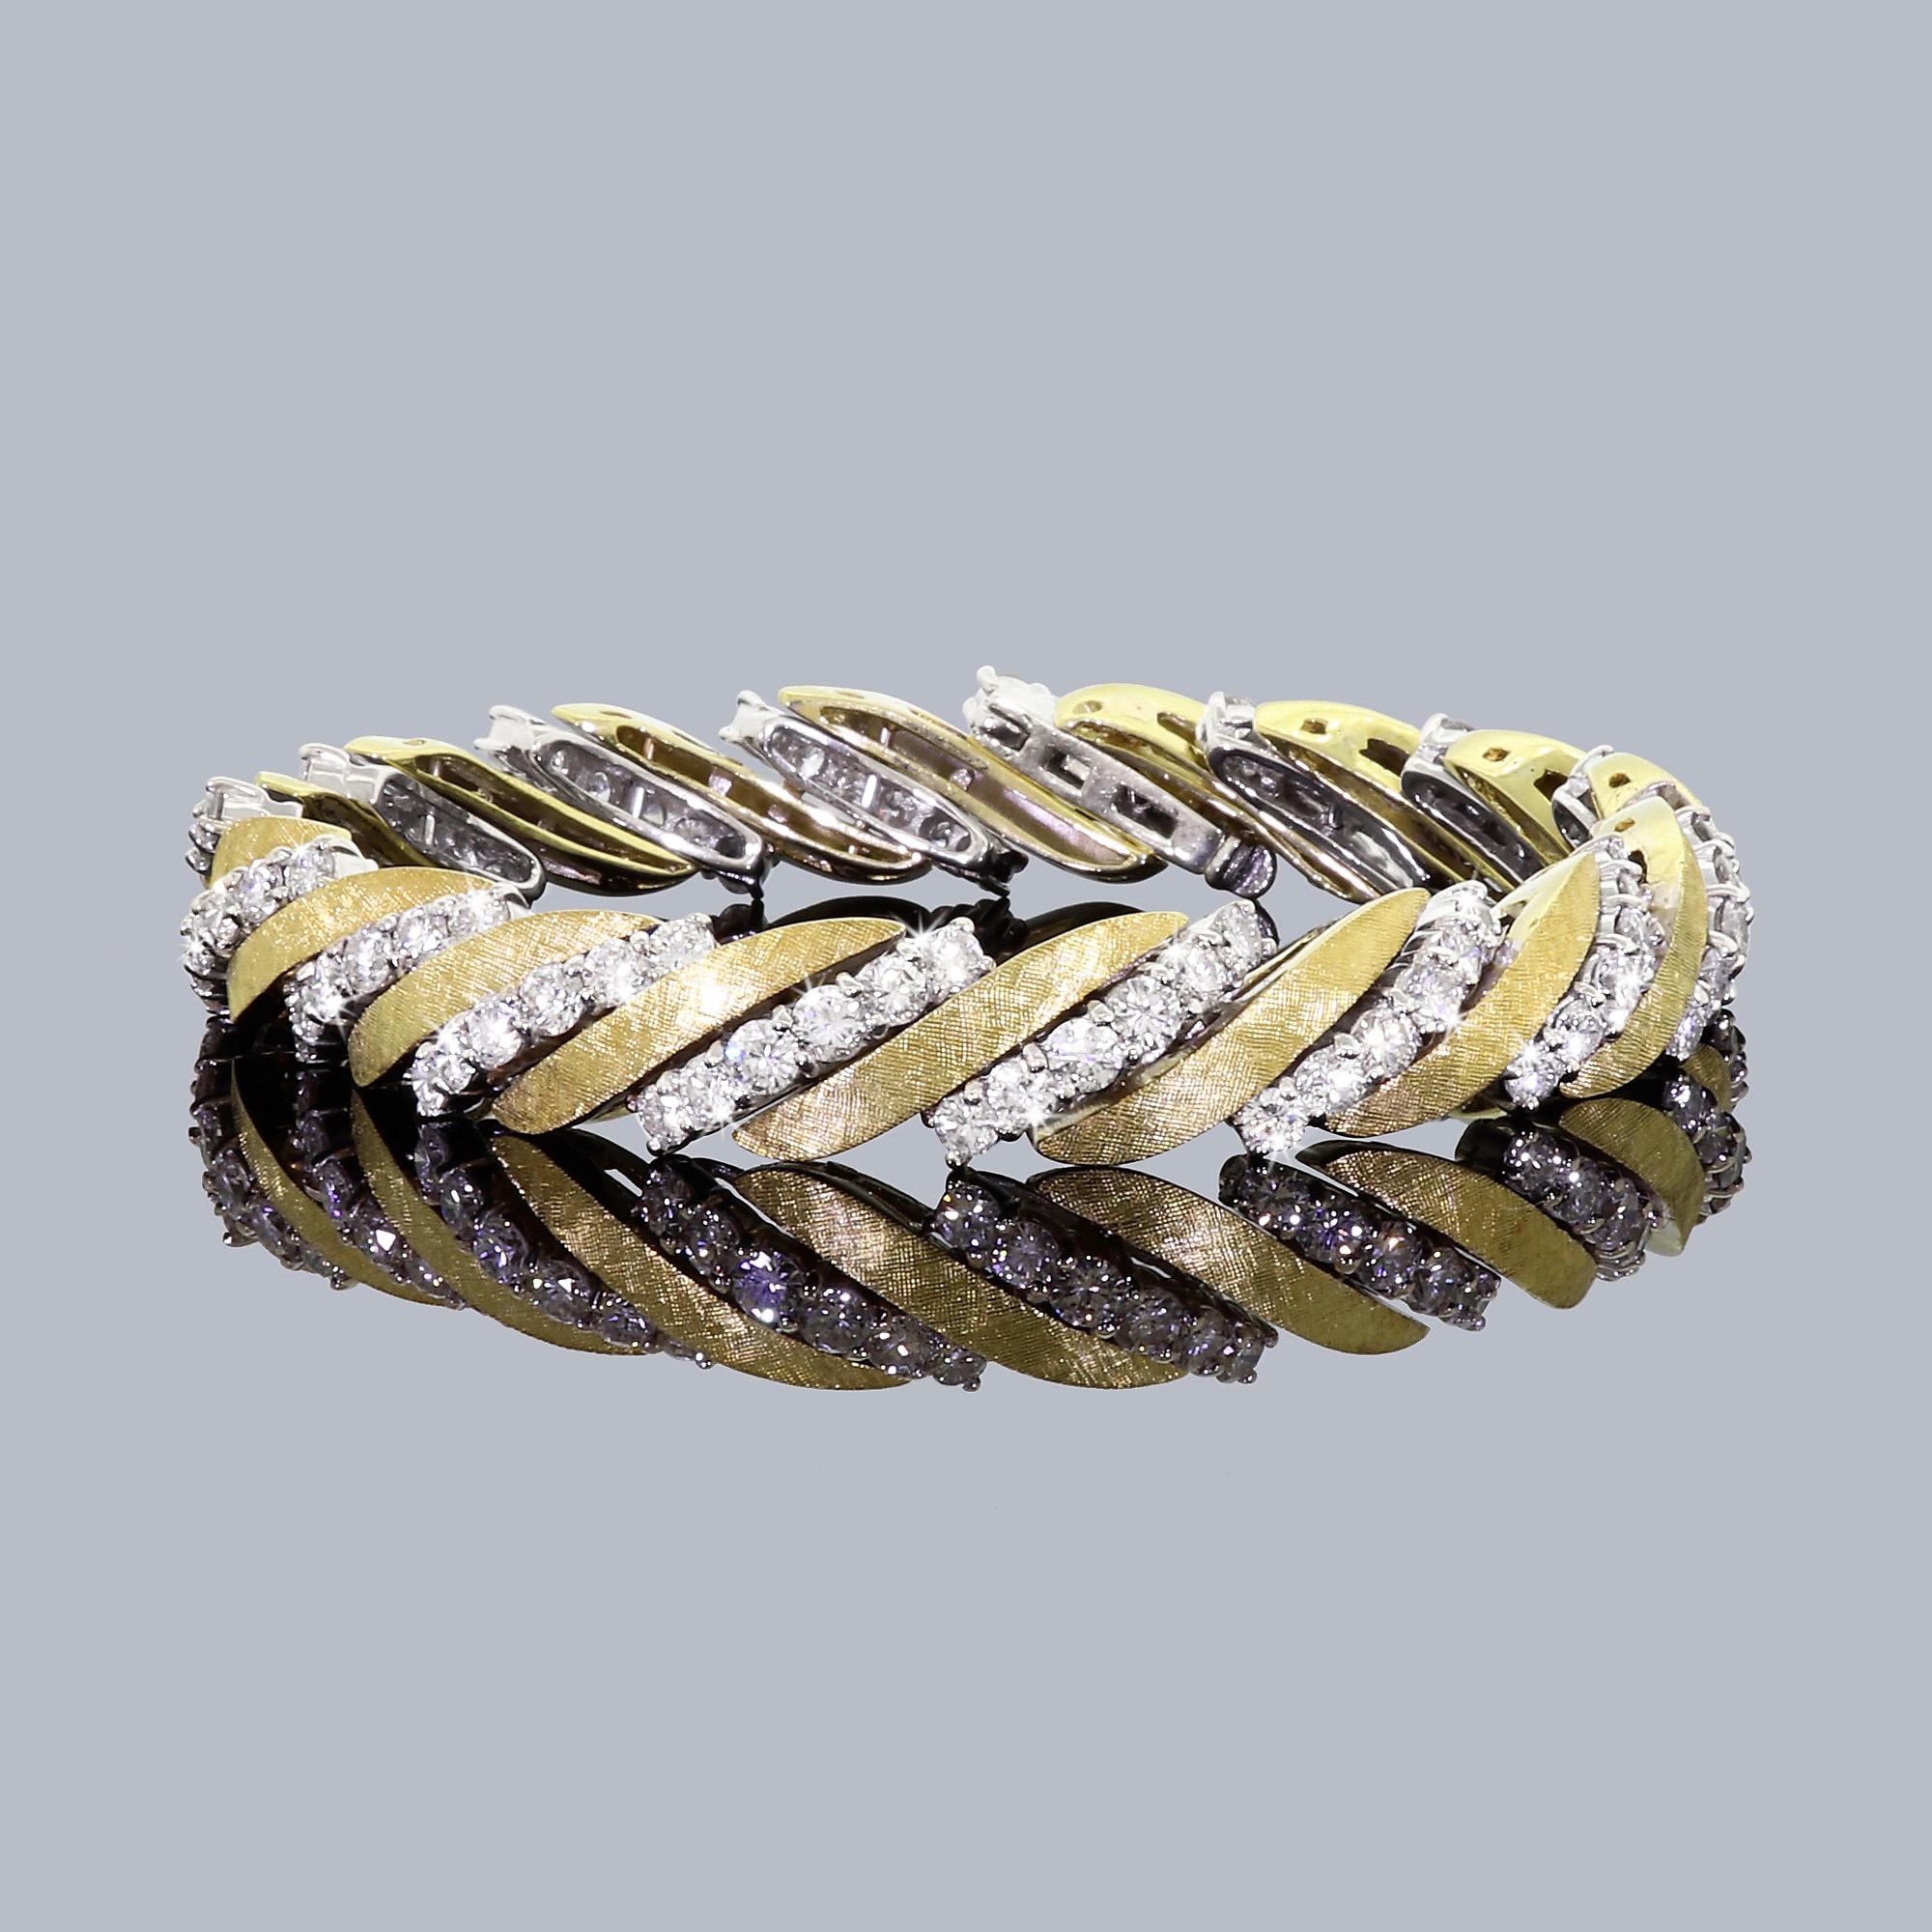 Details & Condition: Fine 18K yellow and white gold dress cocktail bracelet with 7 carats of genuine diamonds.
This piece presents very elegantly and is extremely well made. Perfect for any black tie event, this stunning bracelet is sure to impress.